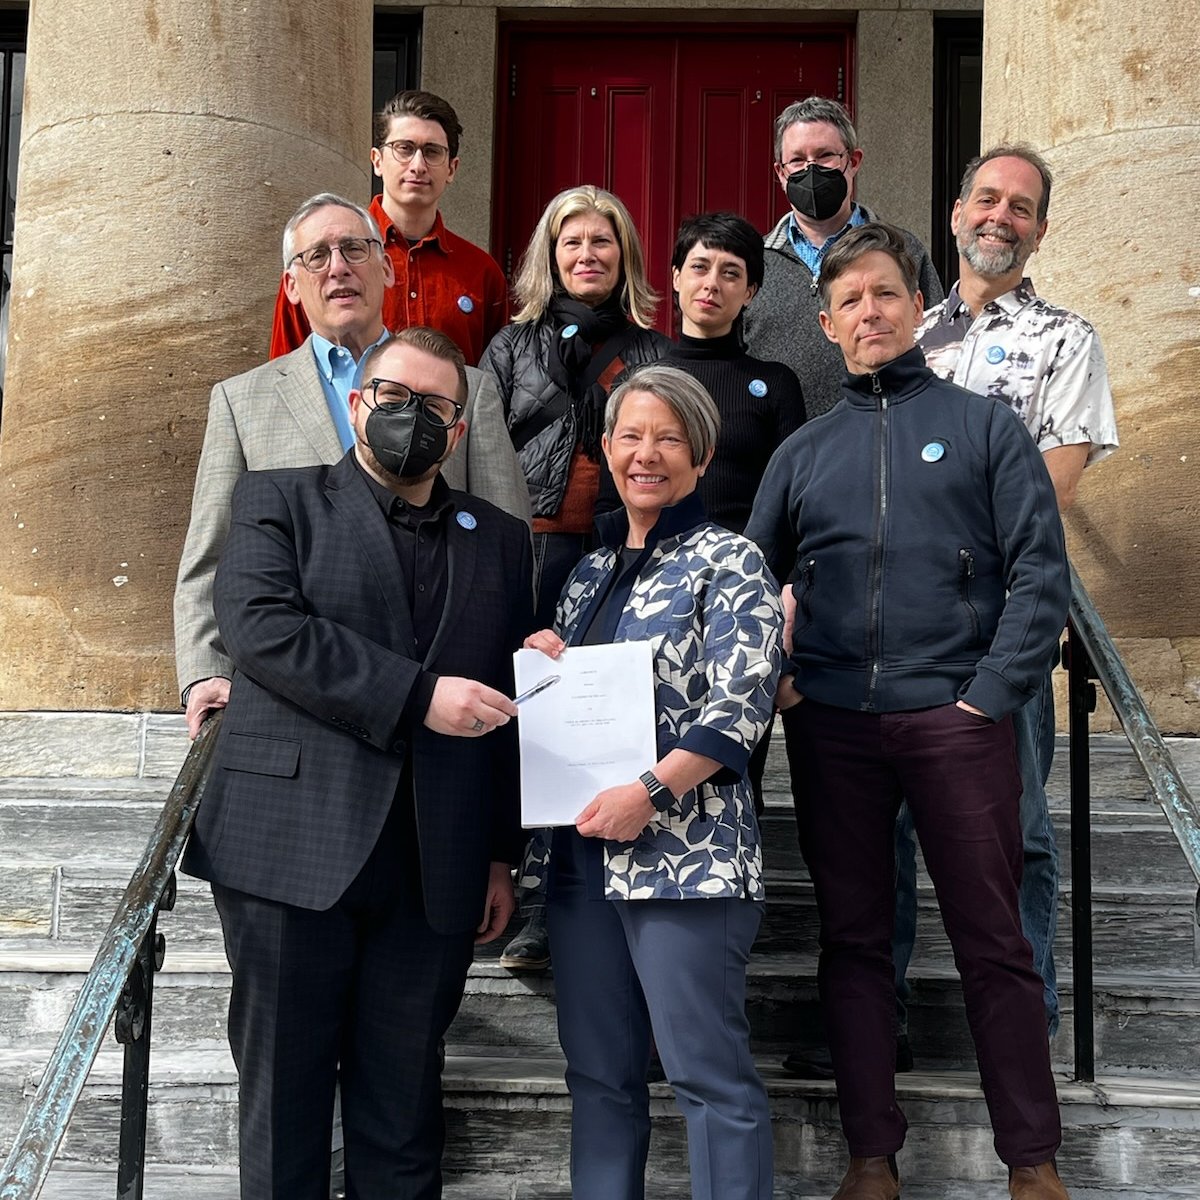 Congratulations @UAPhilly #UArtsUnion who signed their first contract supporting full-time and part-time faculty with University of the Arts administration earlier today!